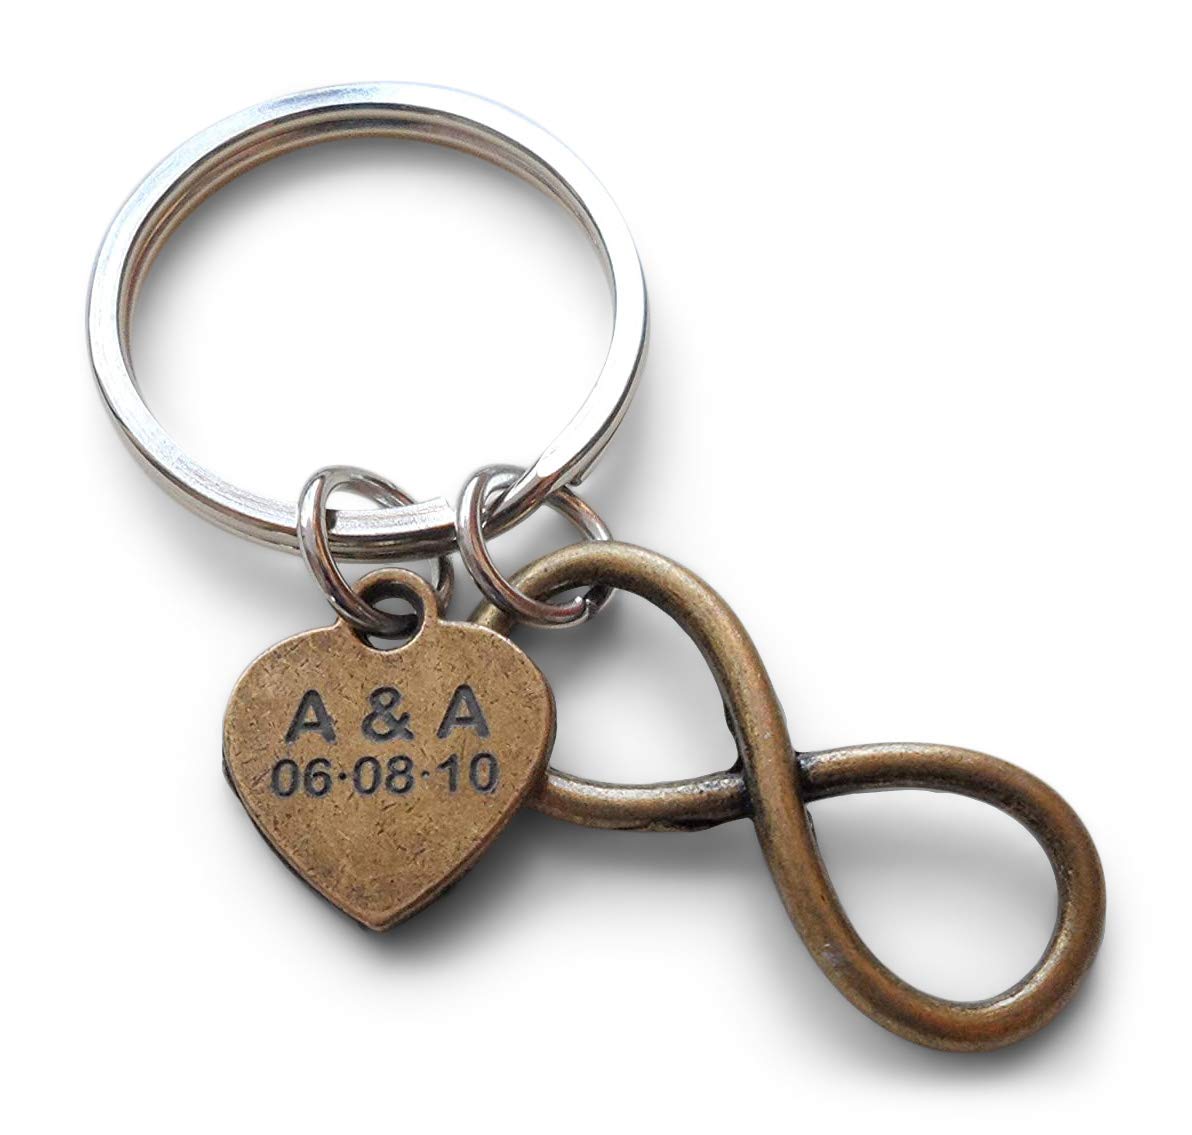 Custom Bronze Infinity Keychain with Engraved Tag for Couples Initials and Date, Anniversary Gift Keychain